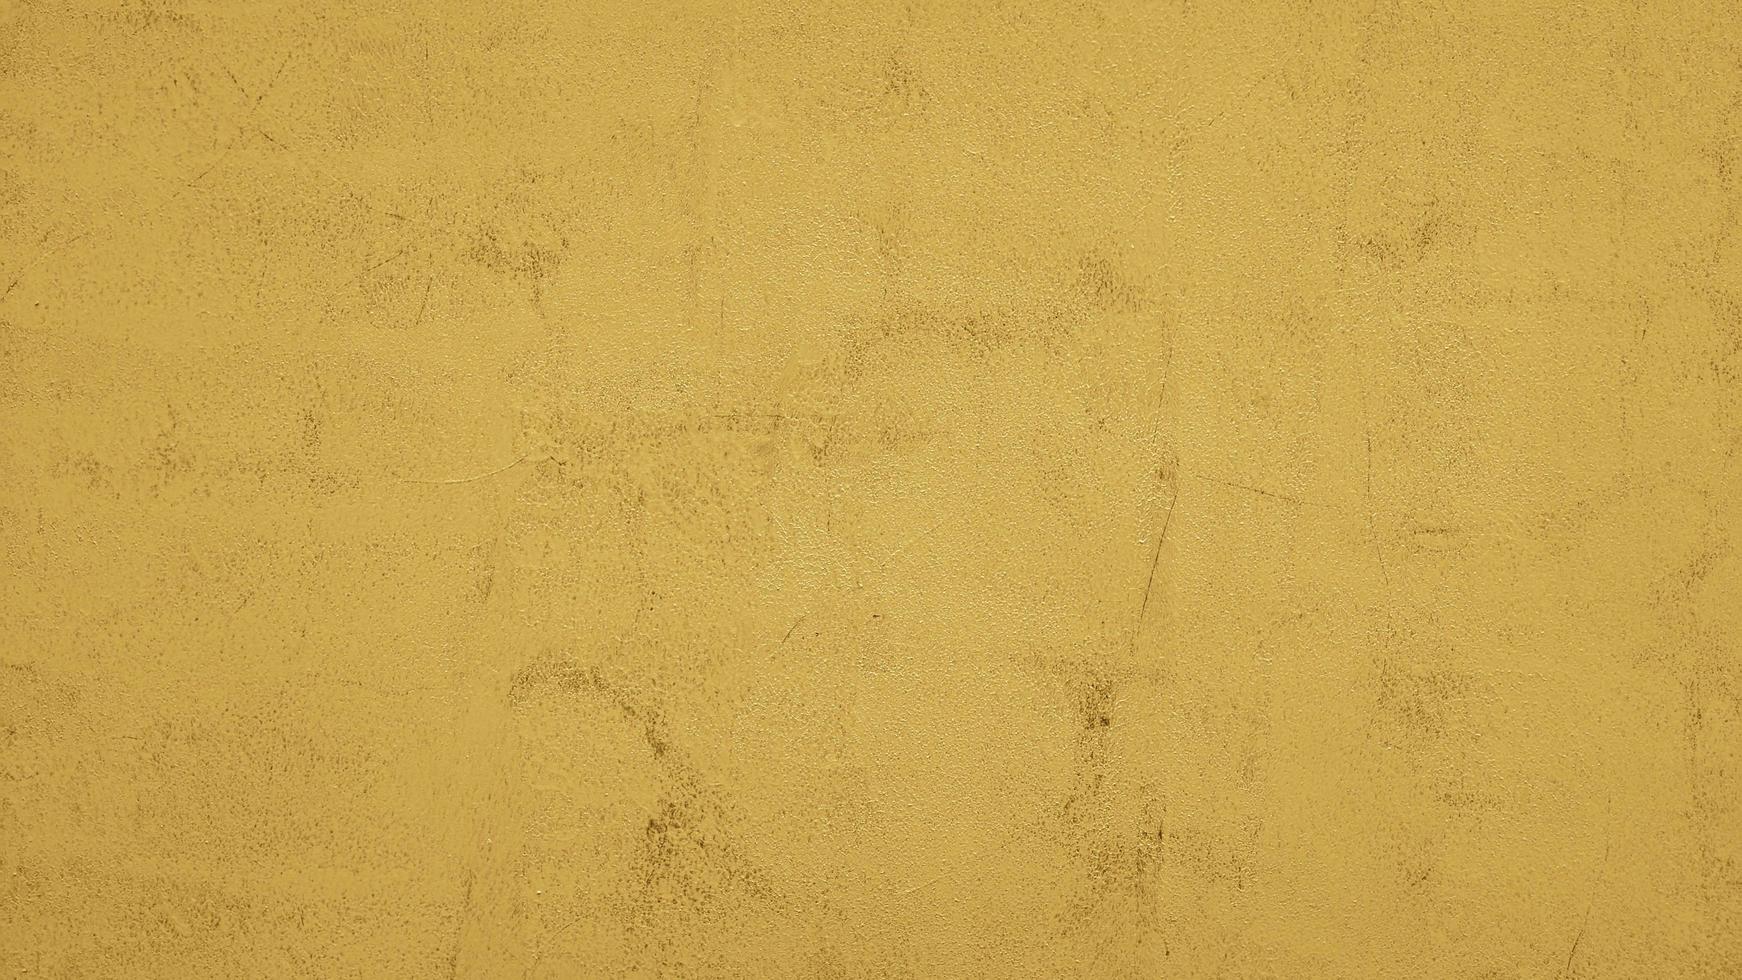 yellow painted abstract concrete wall texture background photo